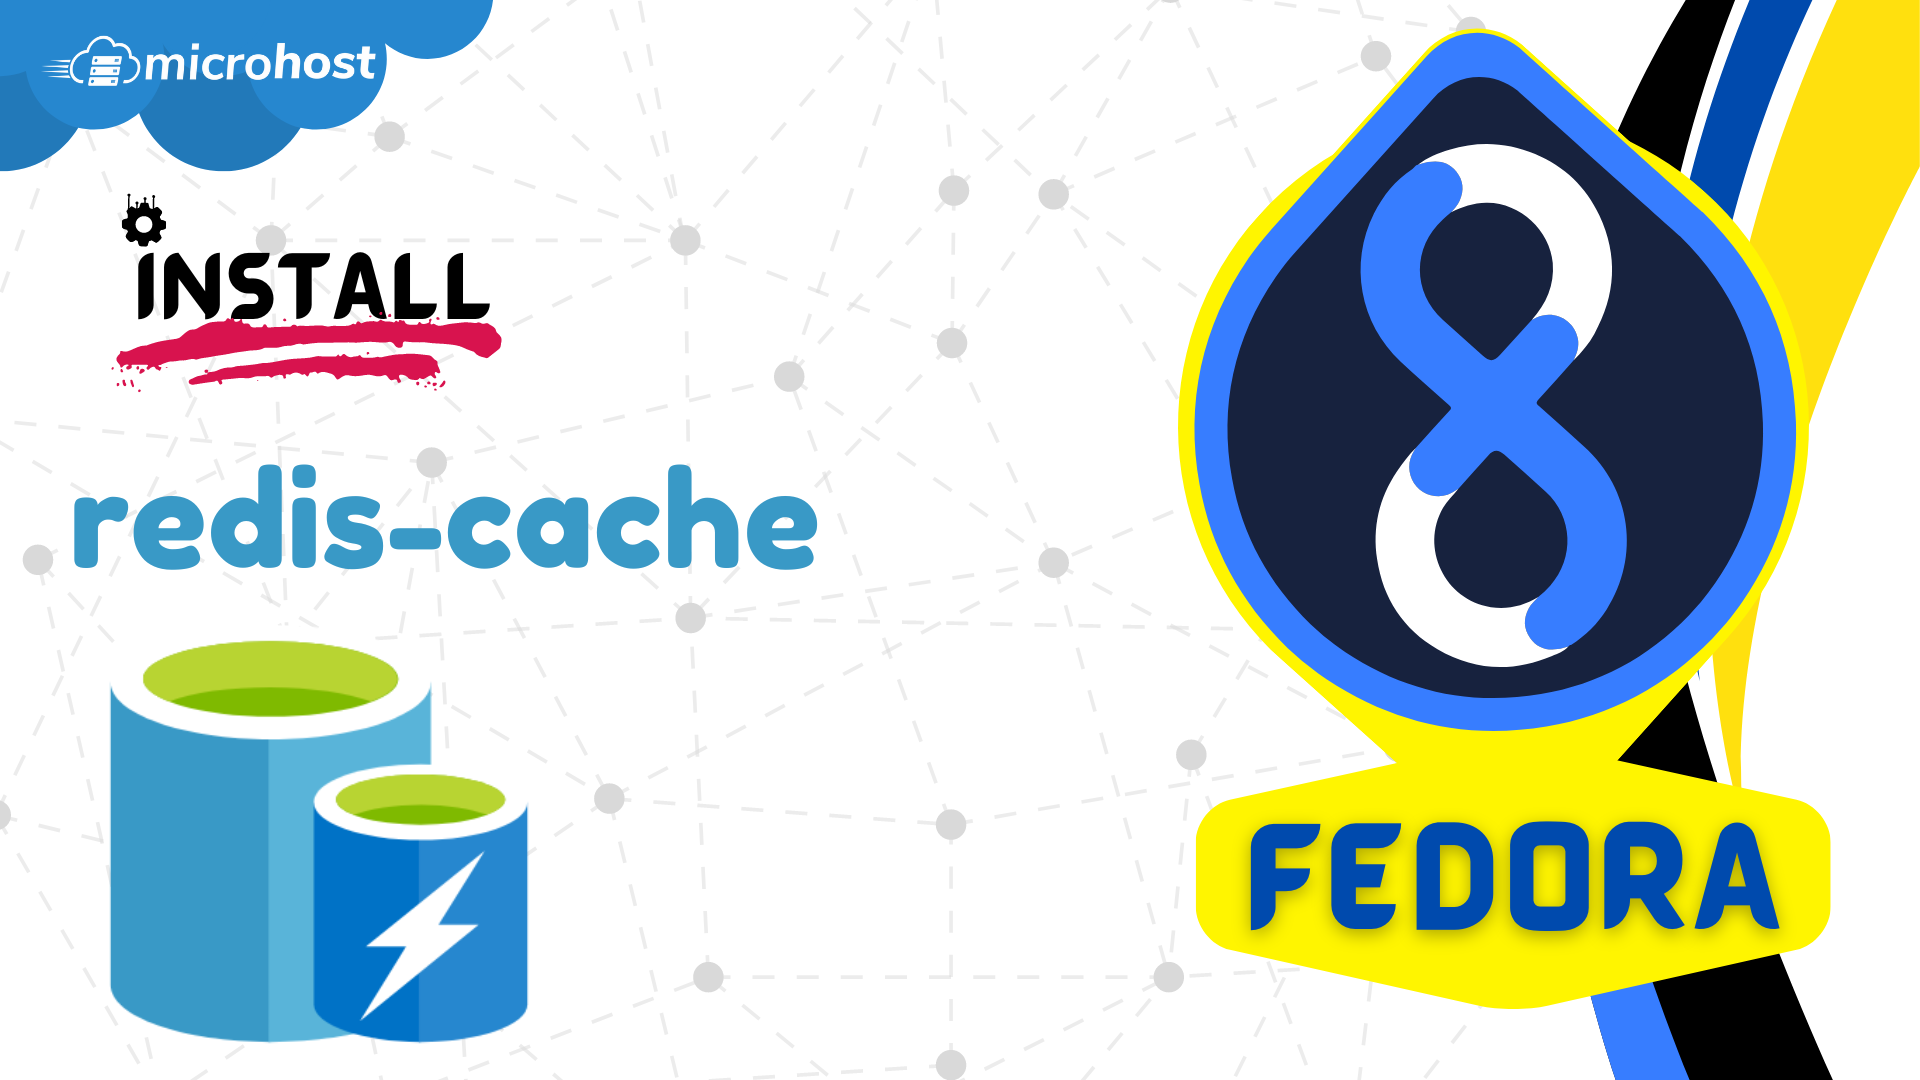 How to install Redis on Fedora